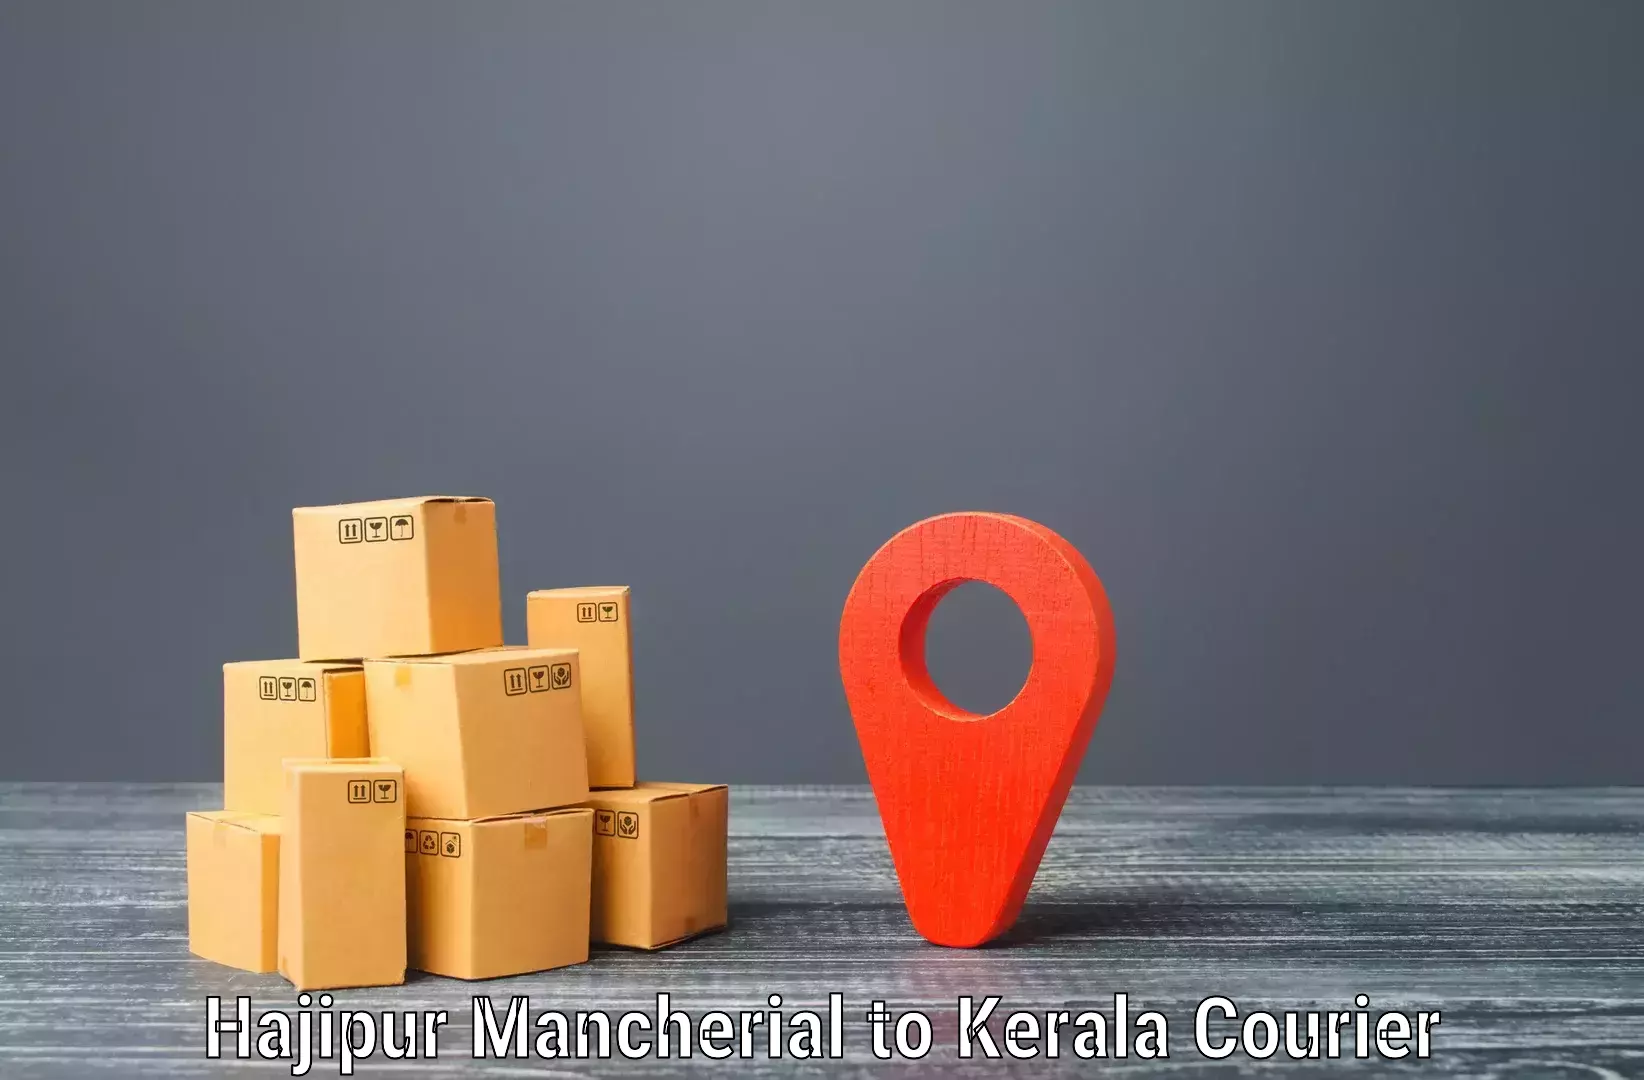 Reliable courier service Hajipur Mancherial to Kerala